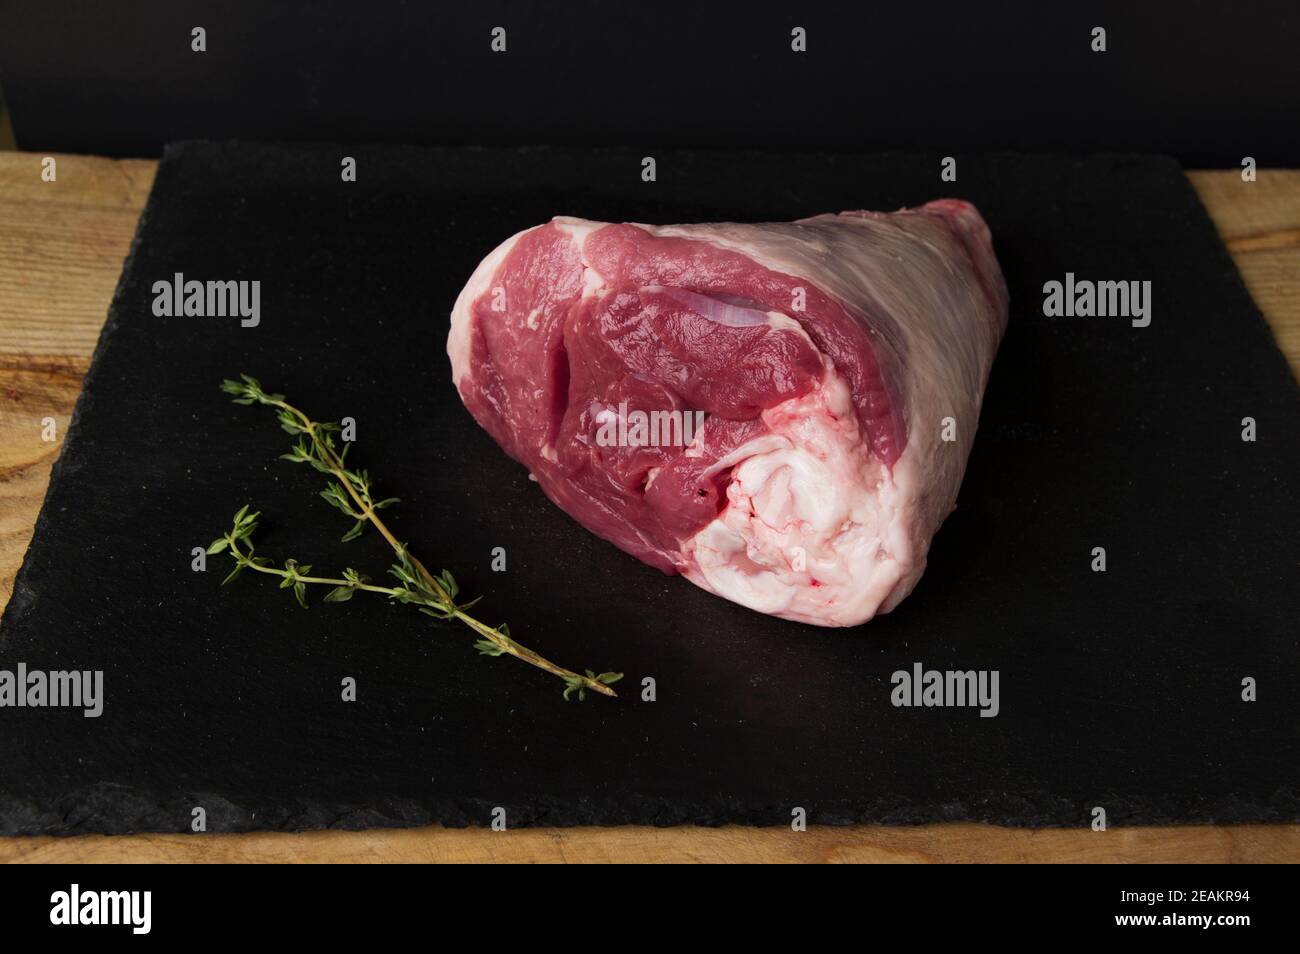 raw beef photographed on a wooden cutting board with a black background Stock Photo